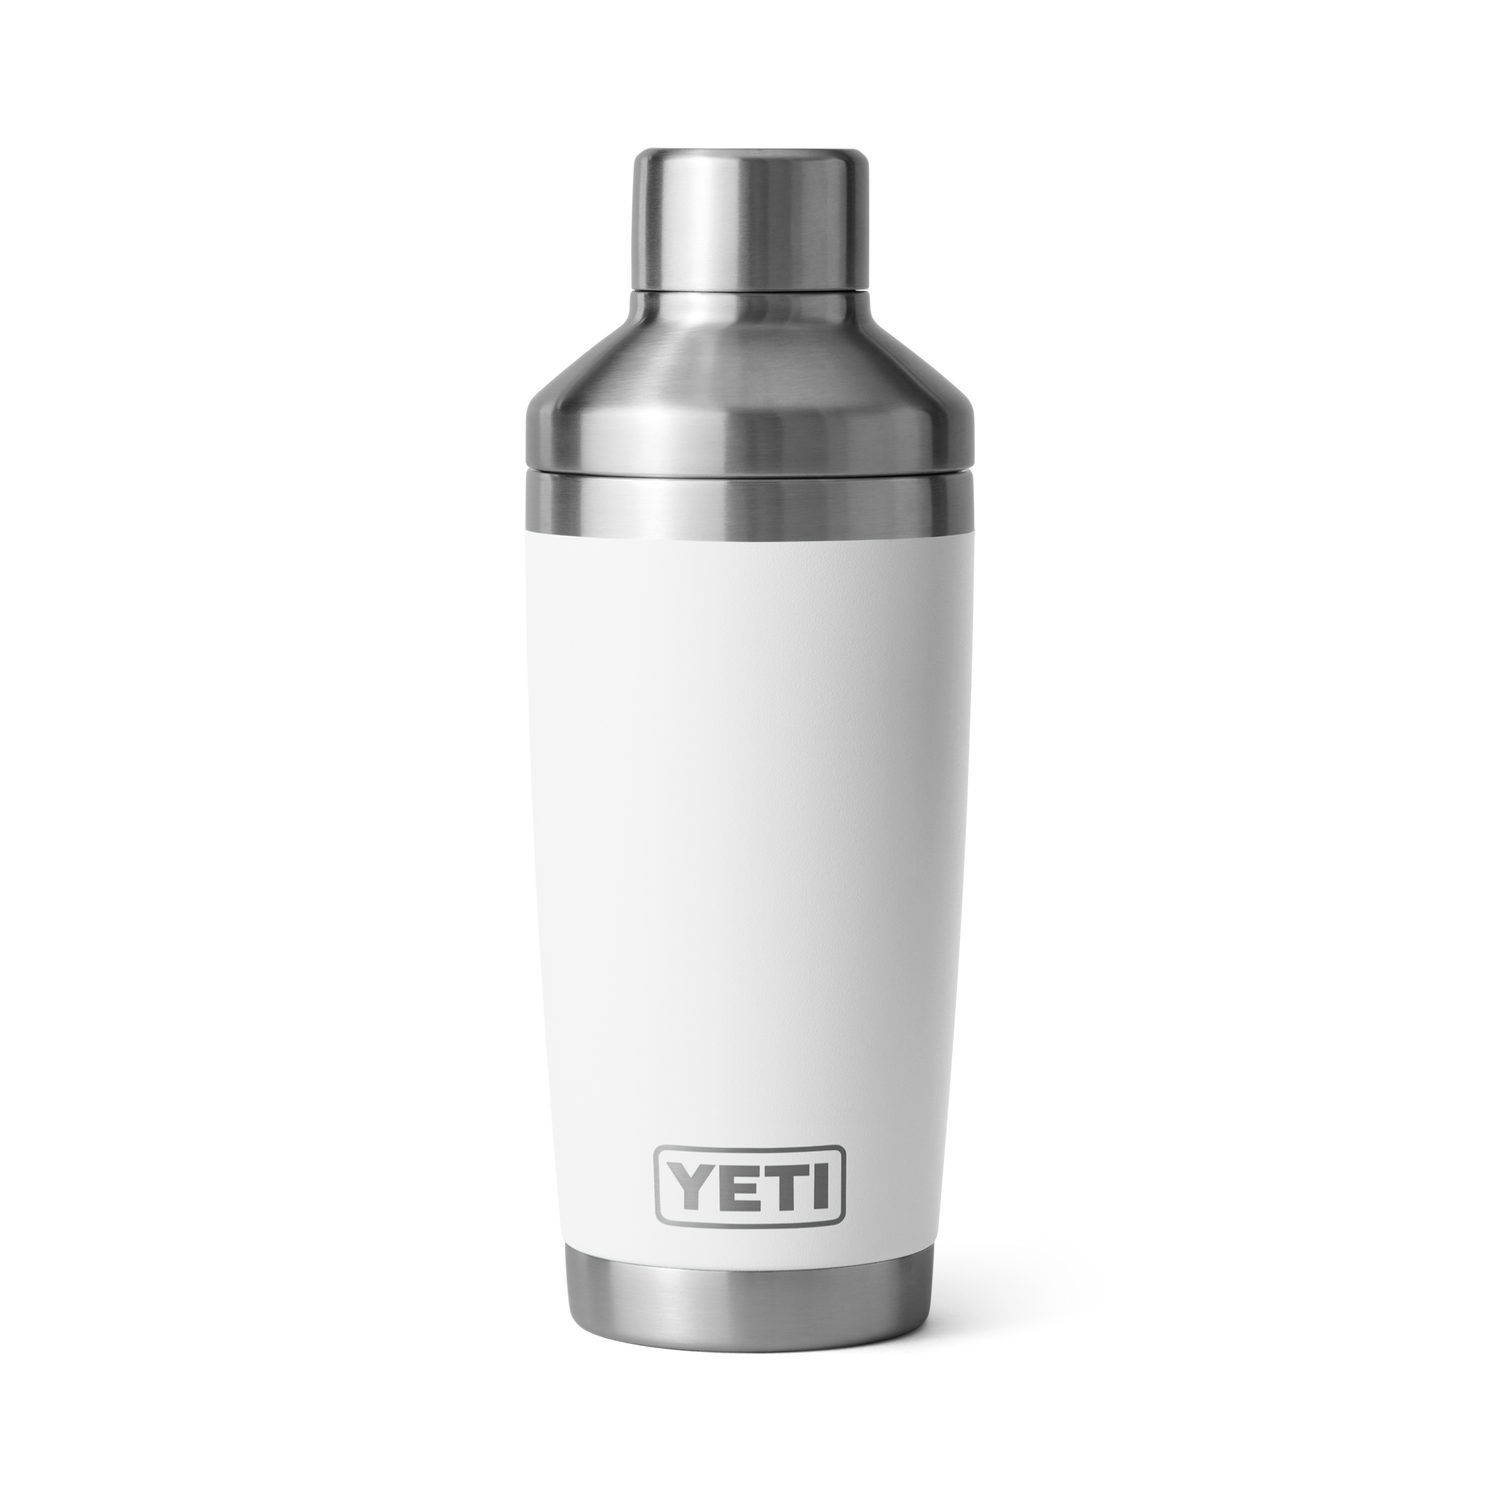 REAL YETI 18 Oz. Laser Engraved Harvest Red Stainless Steel Yeti With Chug  Cap Rambler Bottle Personalized Vacuum Insulated YETI 